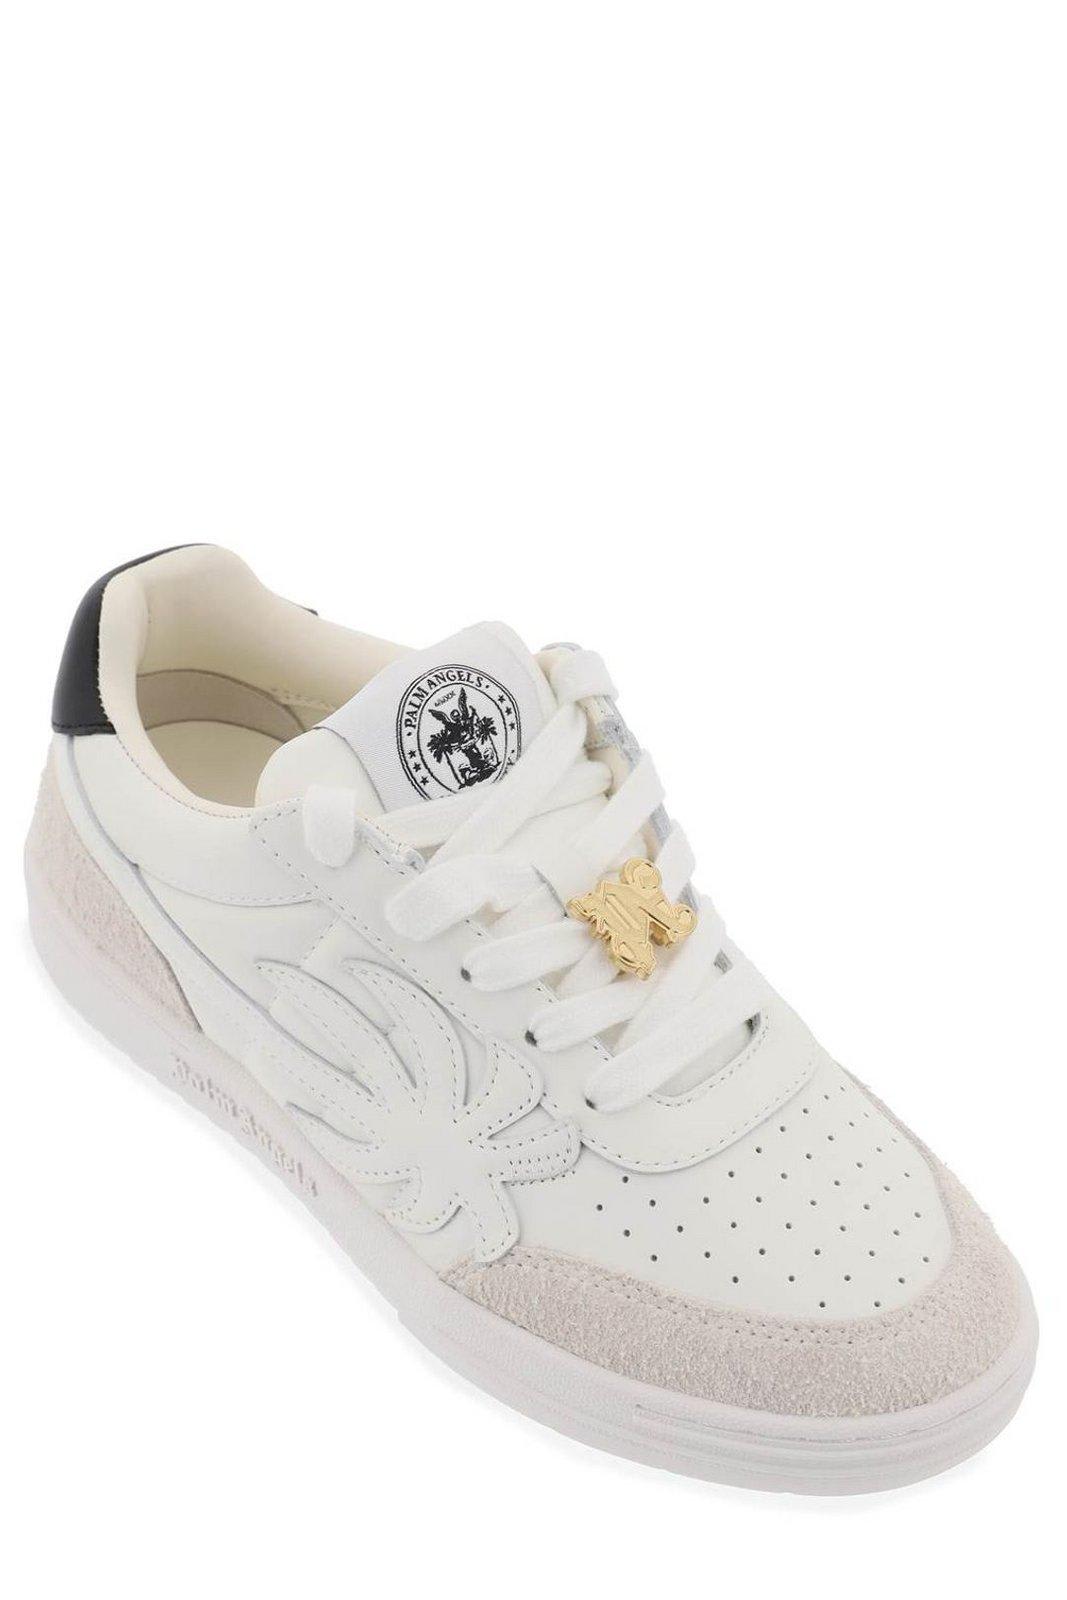 Shop Palm Angels Palm Beach University Low-top Sneakers In White White (white)